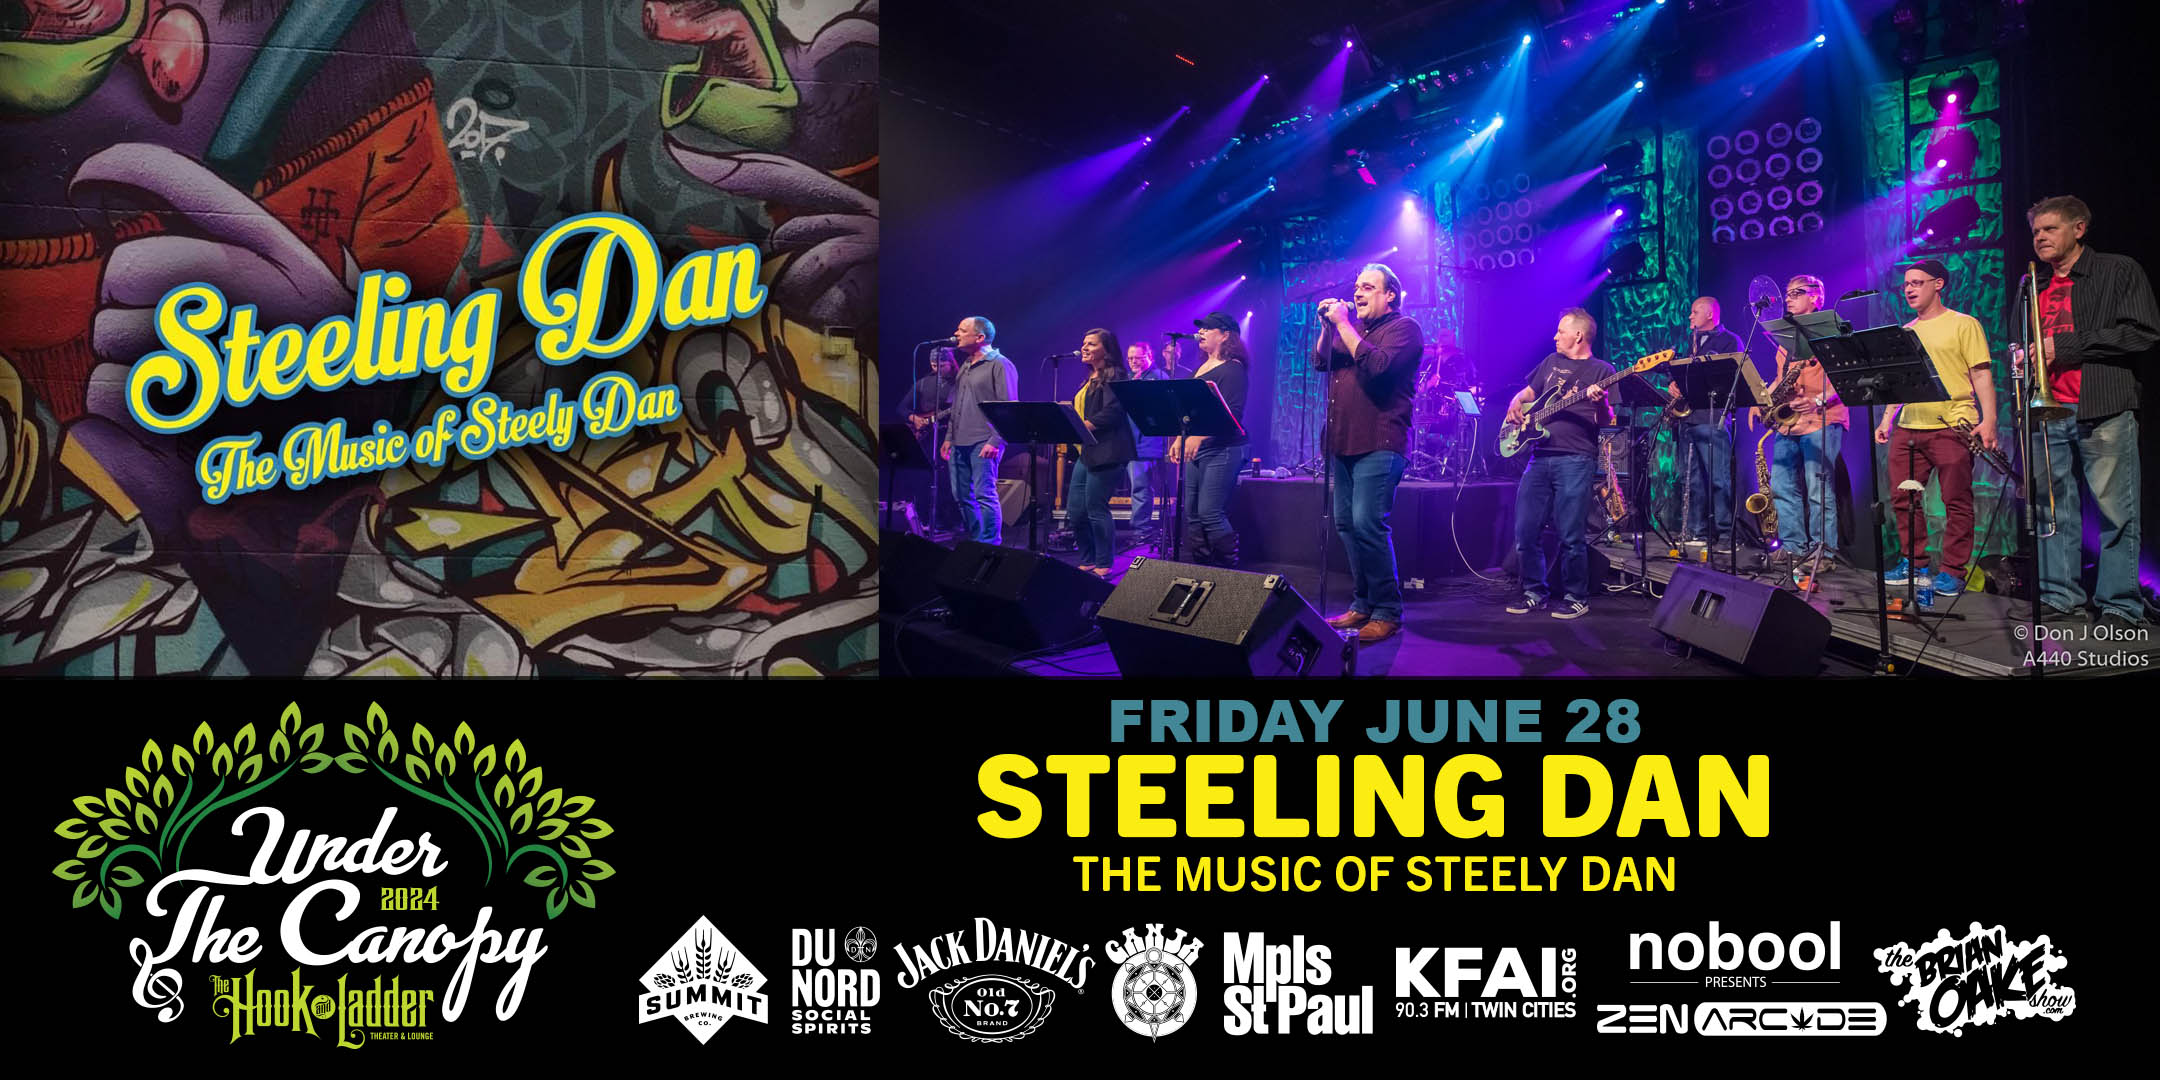 An Evening with Steeling Dan The Music Of Steely Dan (2 Sets) Friday, June 28 Under The Canopy at The Hook and Ladder Theater "An Urban Outdoor Summer Concert Series" Doors 6:00pm :: Music 7:00pm :: 21+ Reserved Seats: $36 GA: $24 ADV / $30 DOS